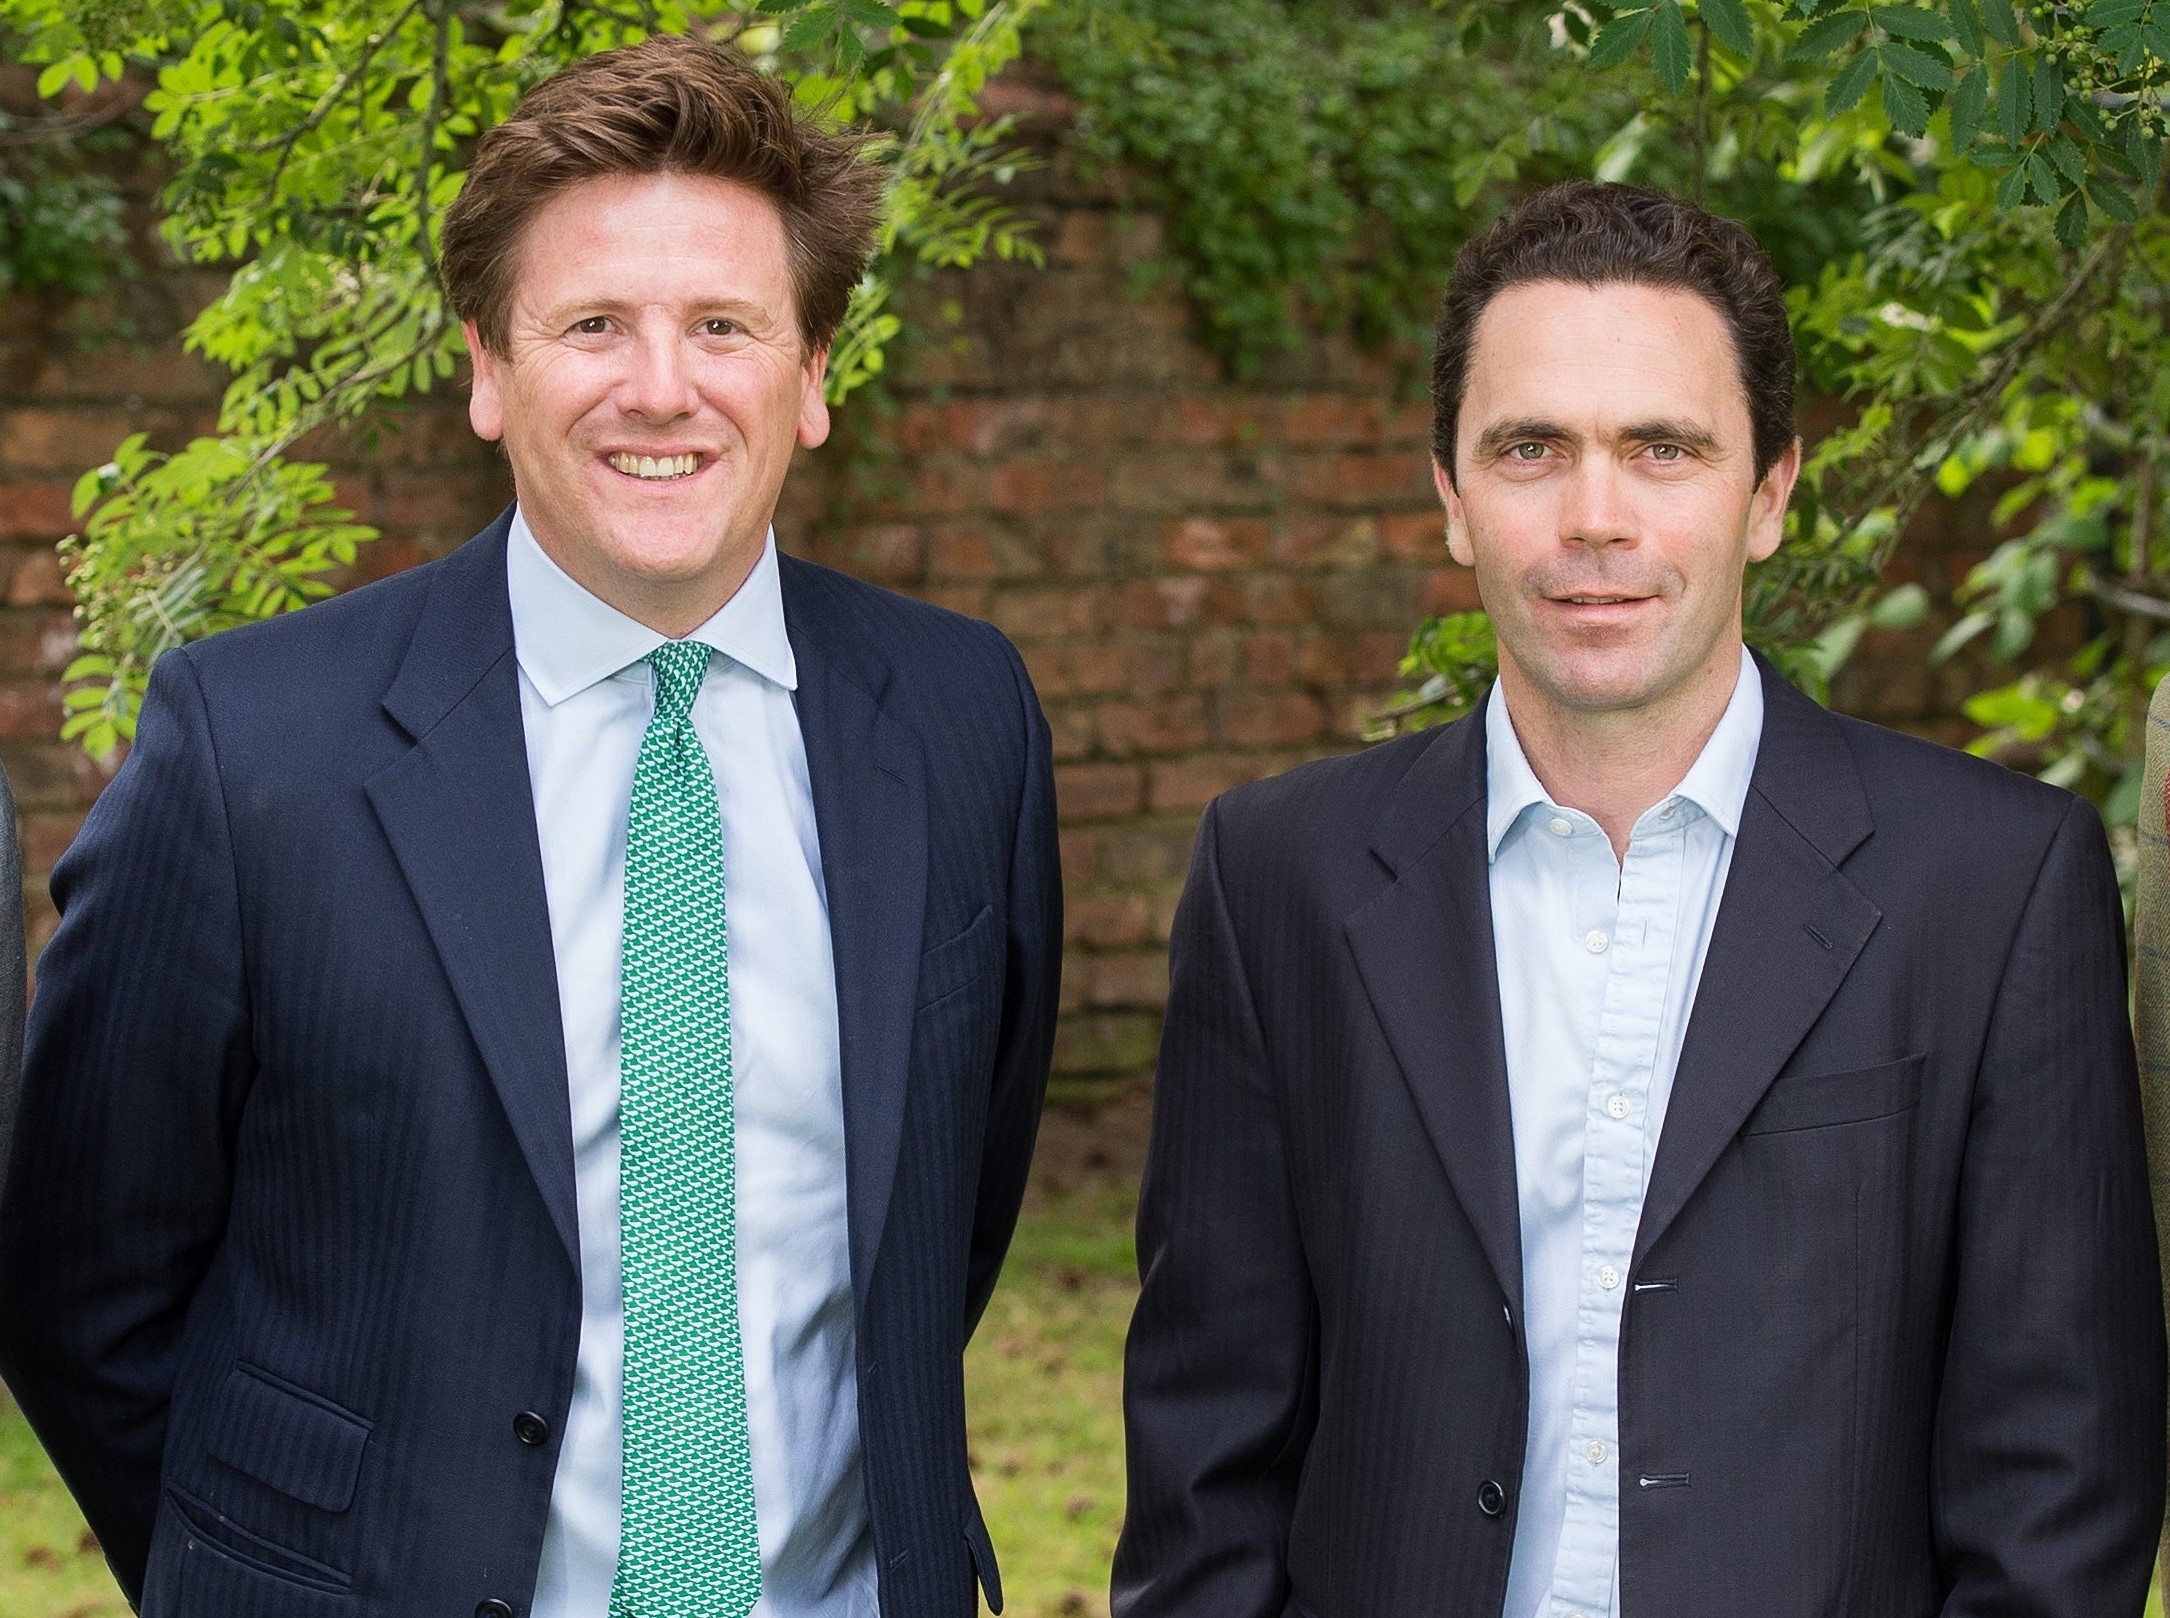 Former Estate Agents Expand Their Home Buying Agency Property Industry Eye